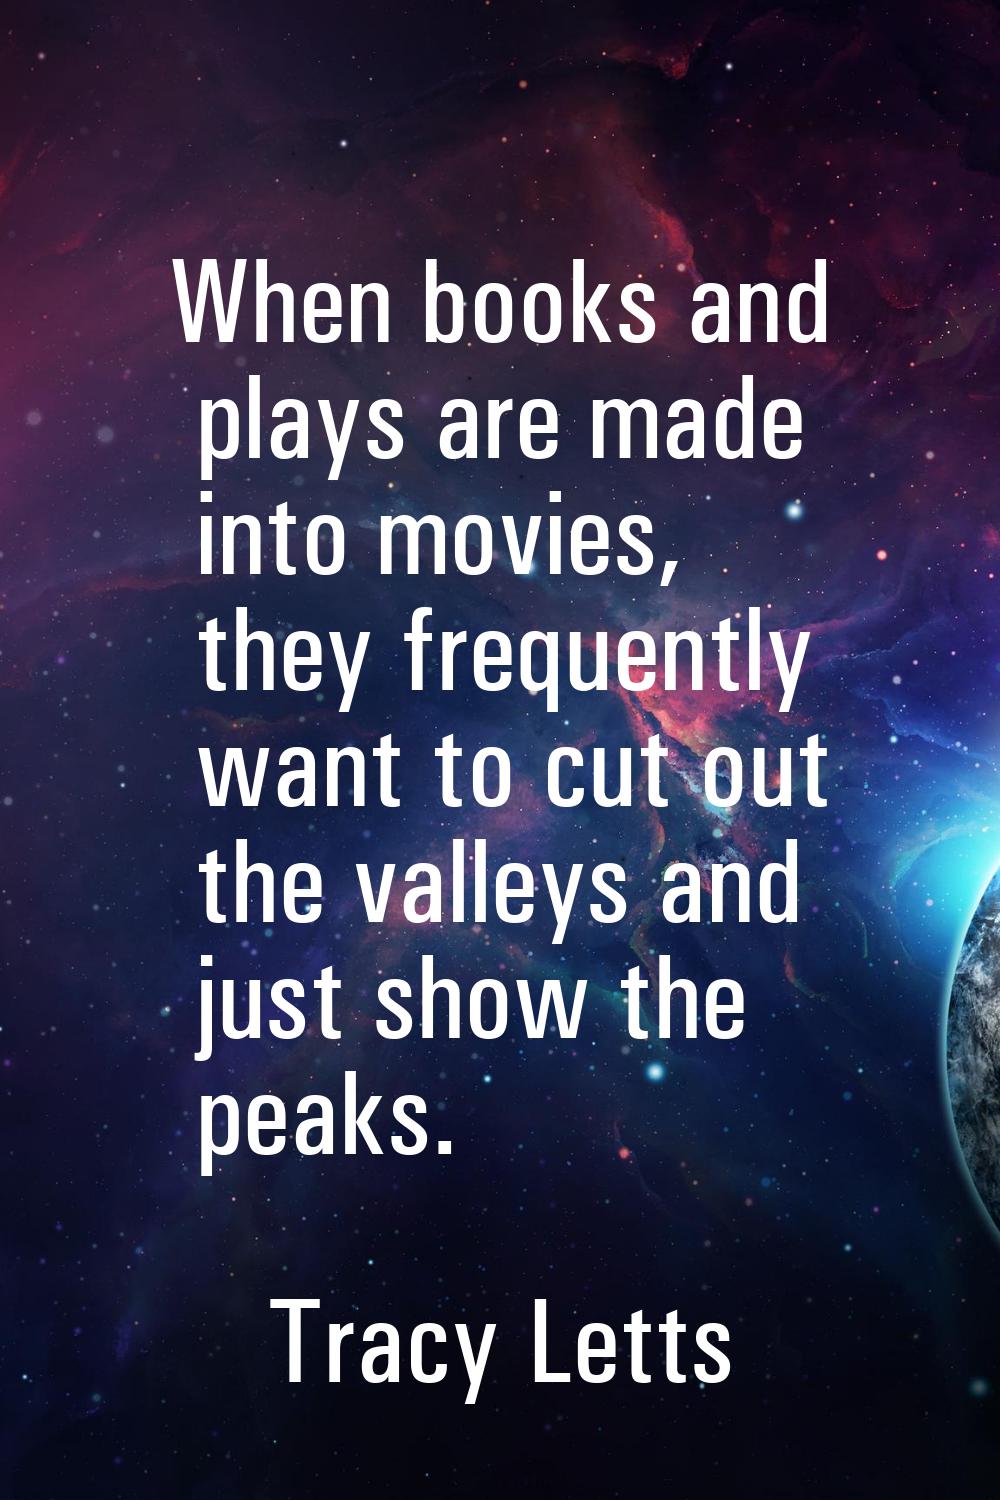 When books and plays are made into movies, they frequently want to cut out the valleys and just sho